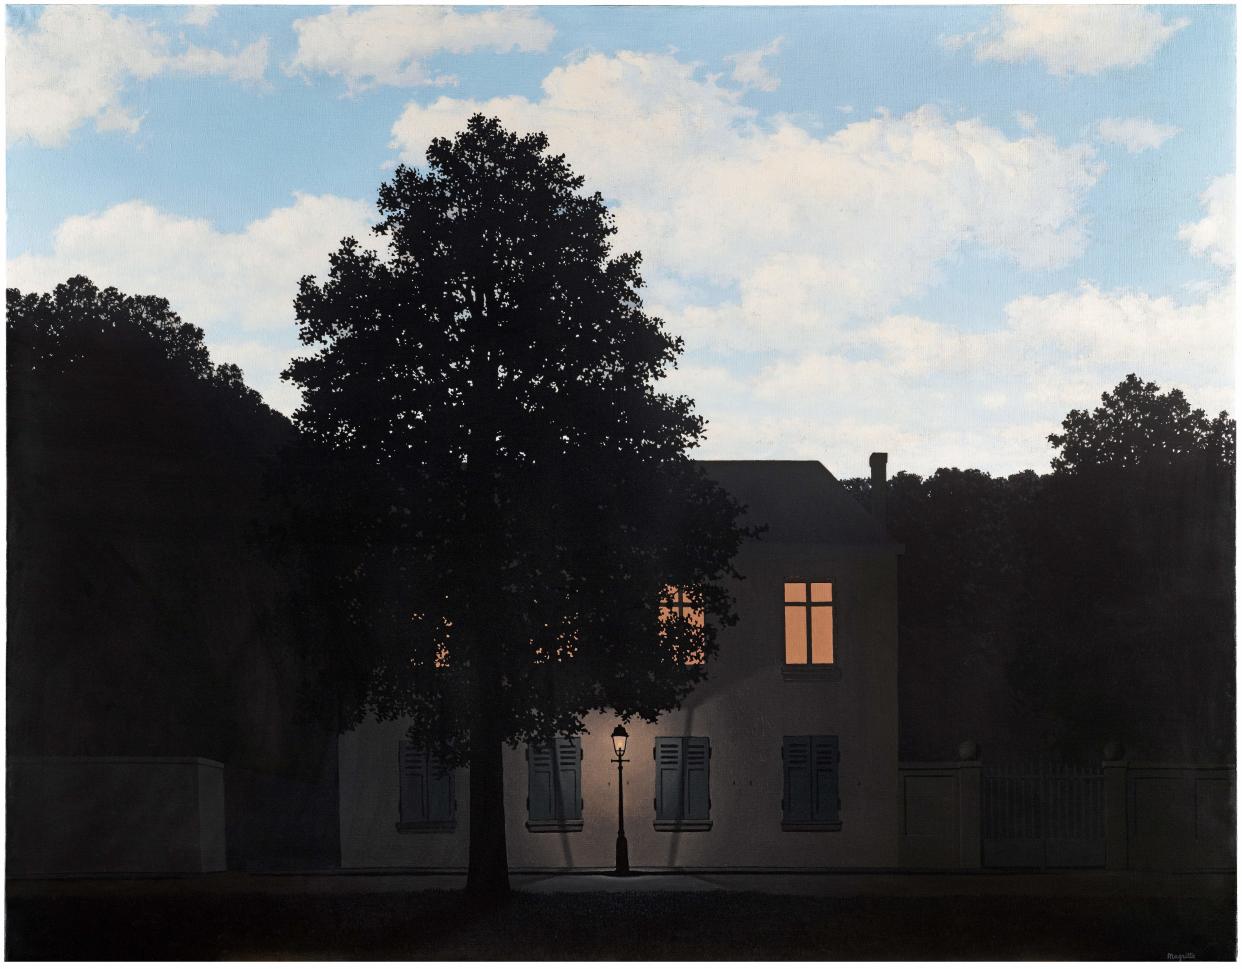 The series of paintings depicts a paradoxical image of a night time scene beneath a sunlit sky (Sotheby’s/ PA)